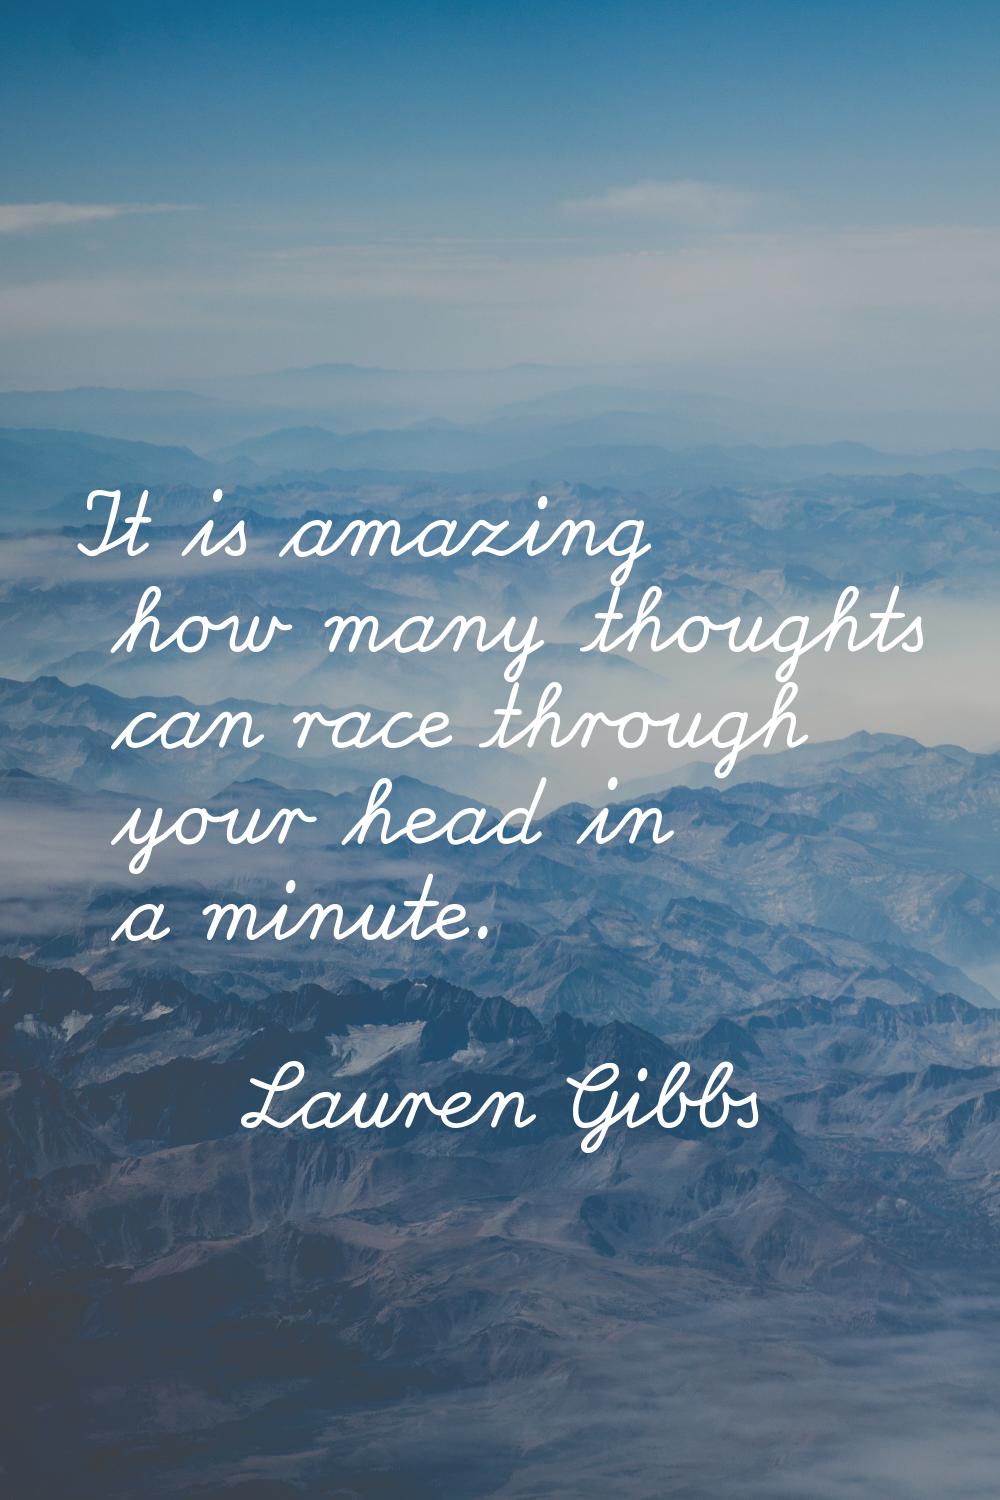 It is amazing how many thoughts can race through your head in a minute.